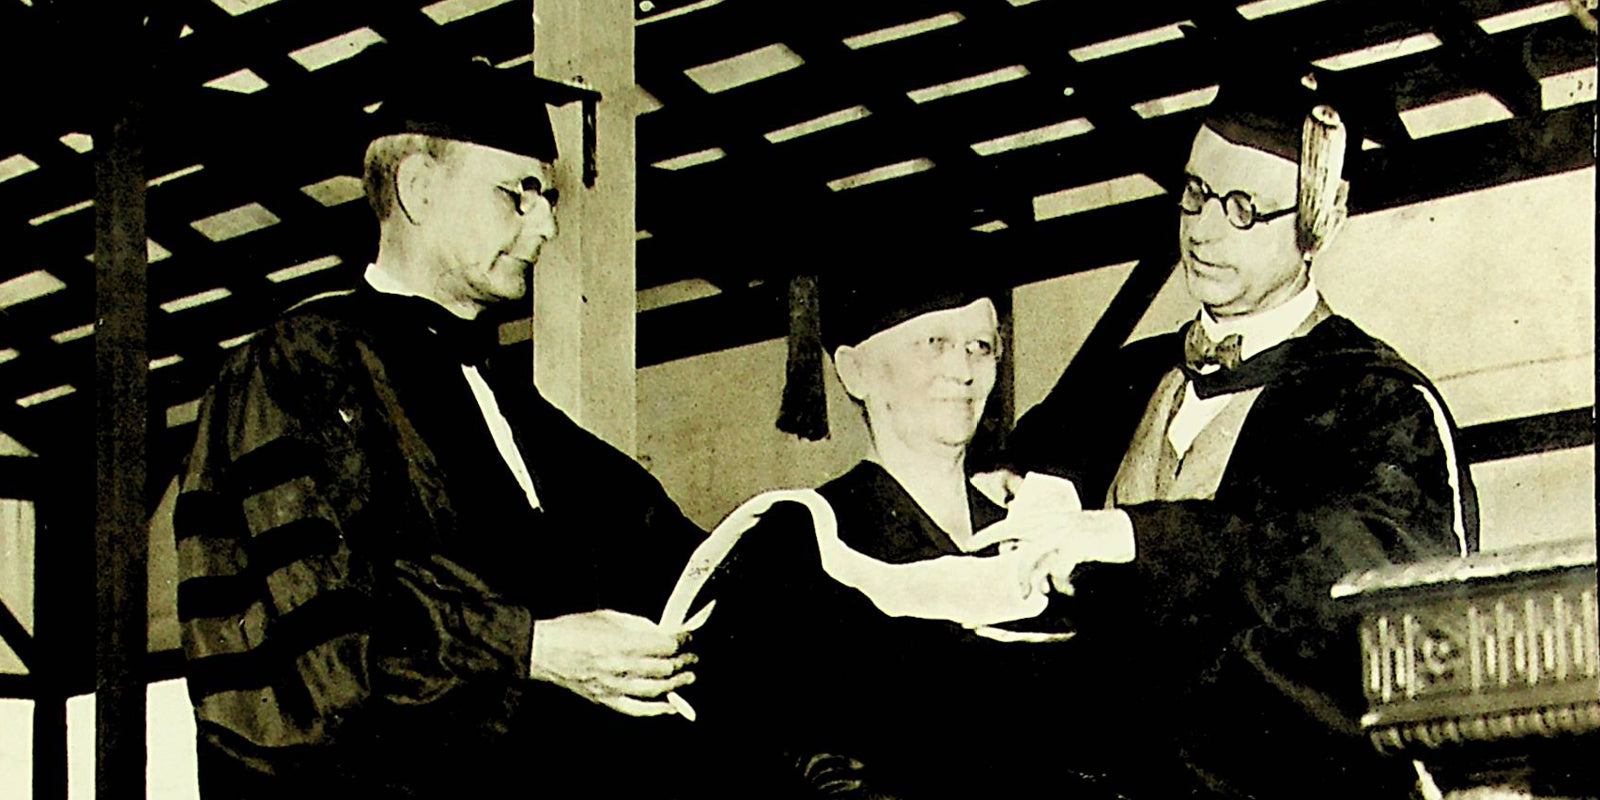 Mary Chase receiving her honorary M.A. from the University of Michigan in 1930.